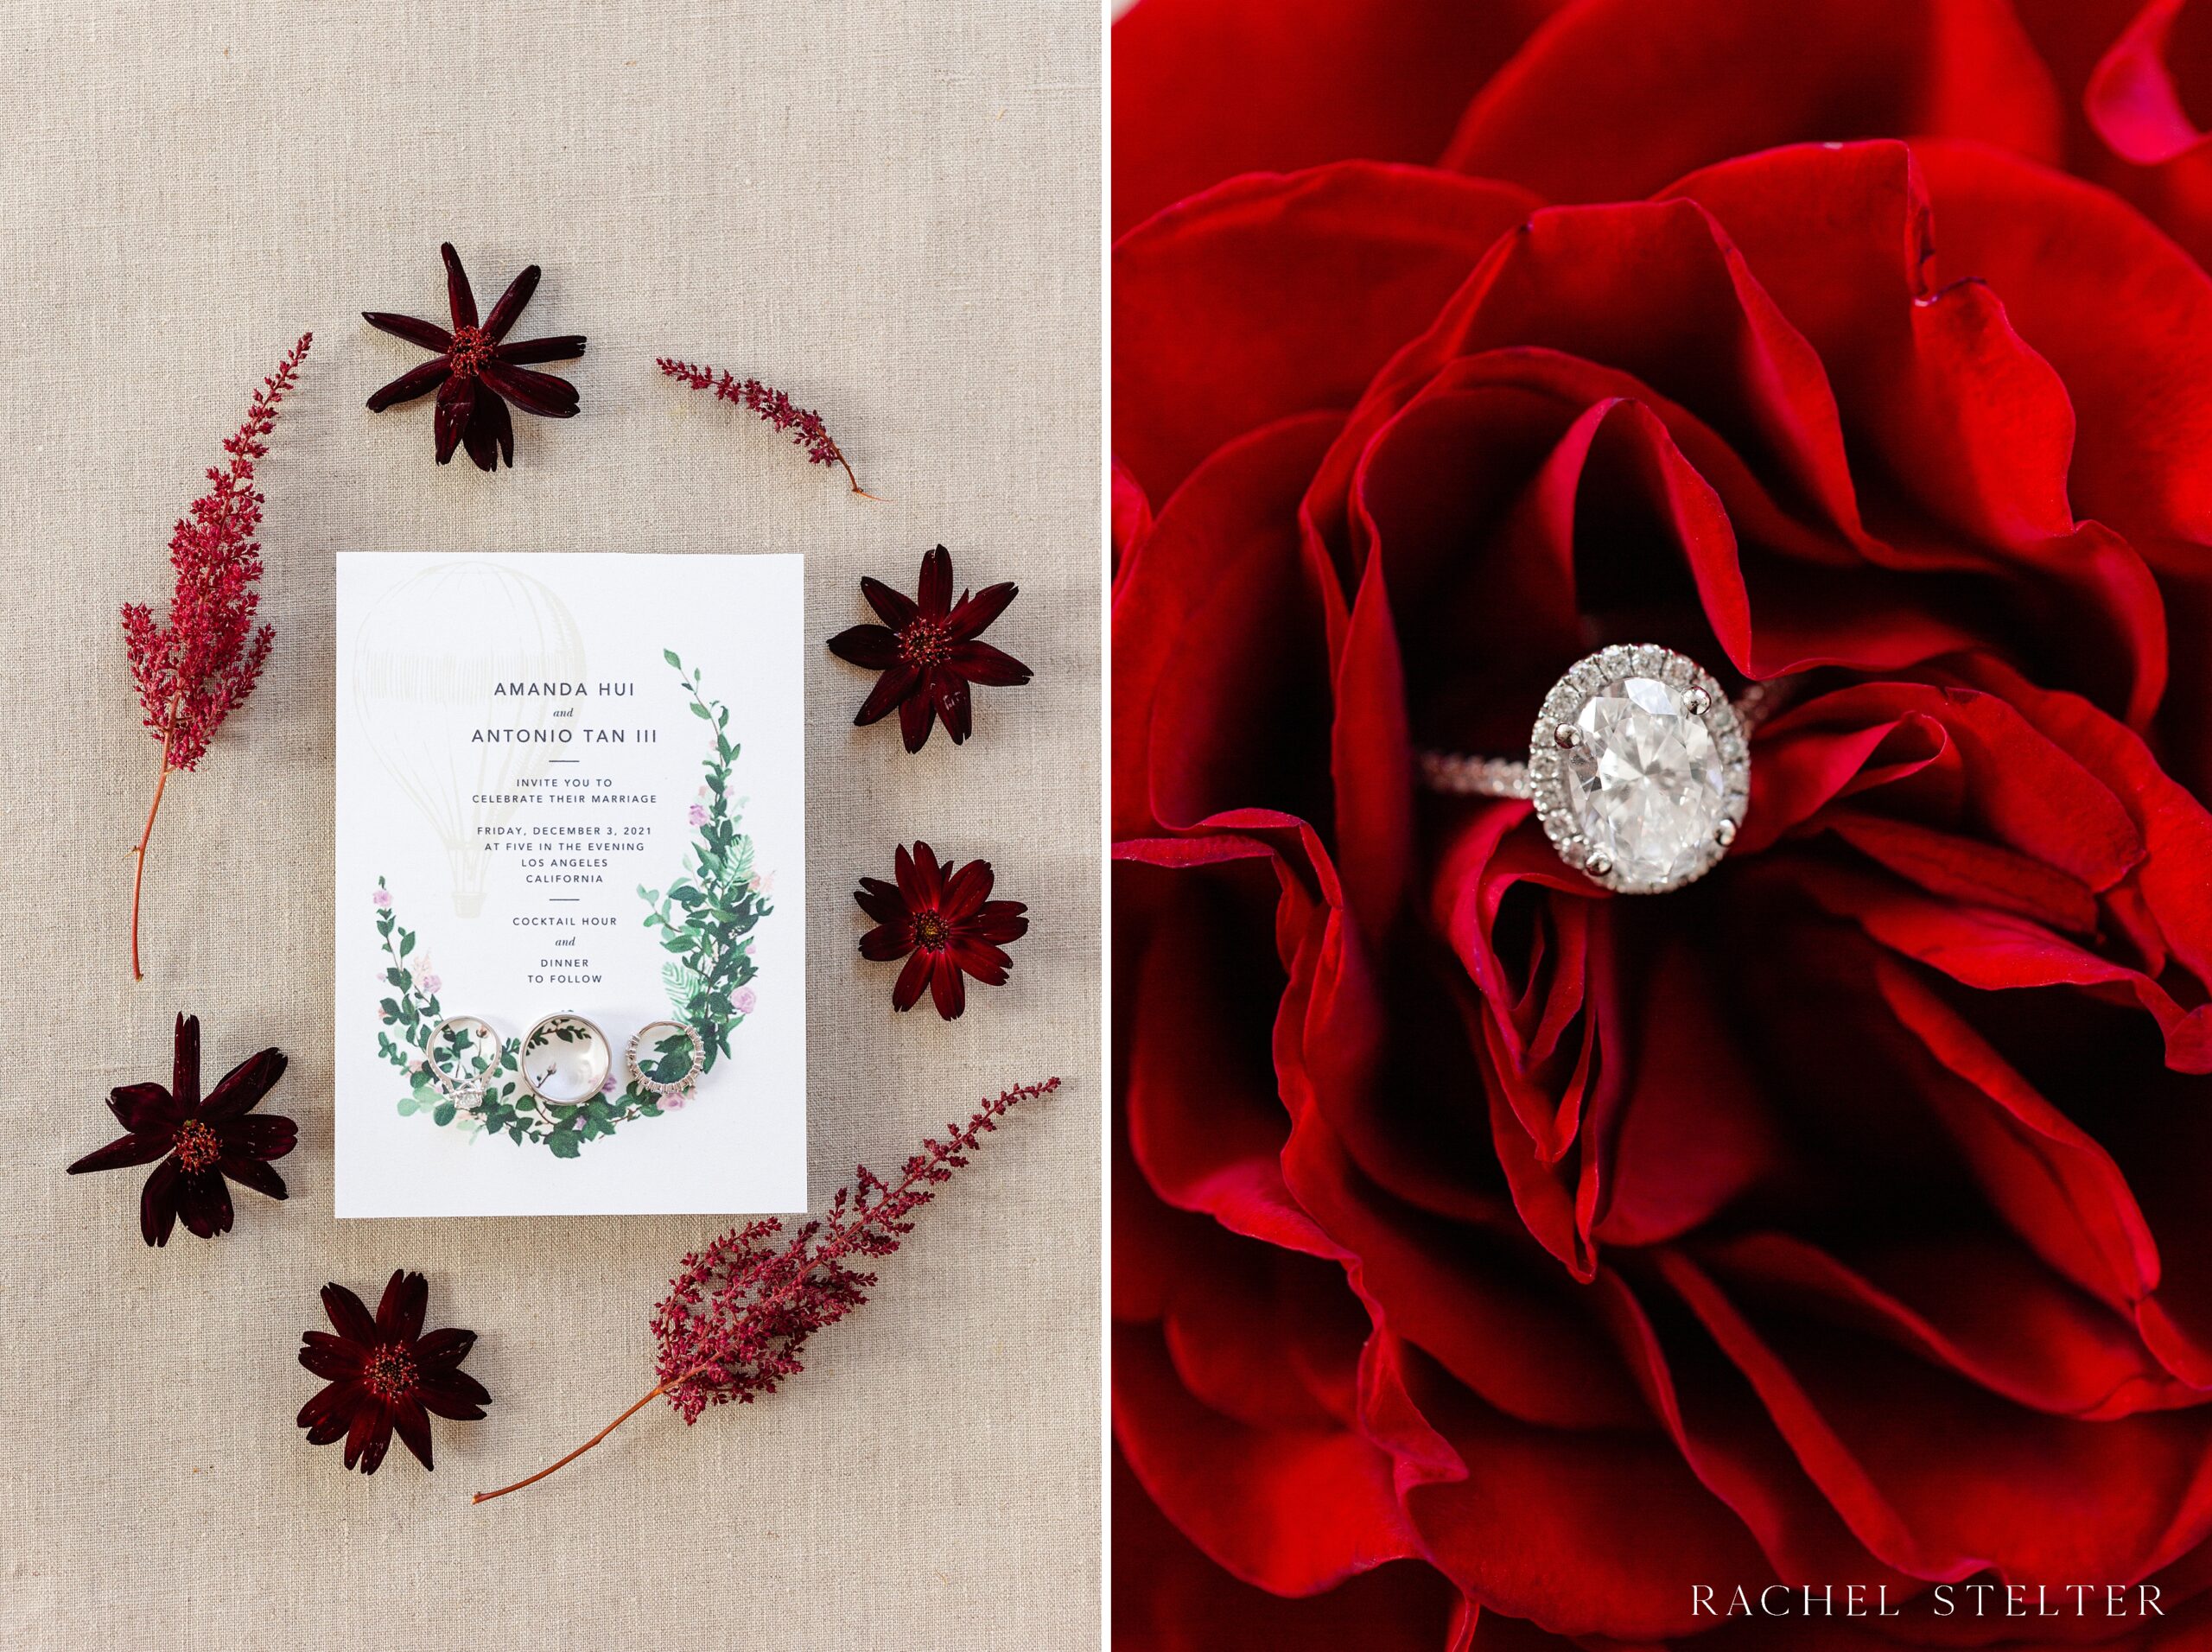 deep red florals surround the invitation to a winter wedding in downtown Los Angeles